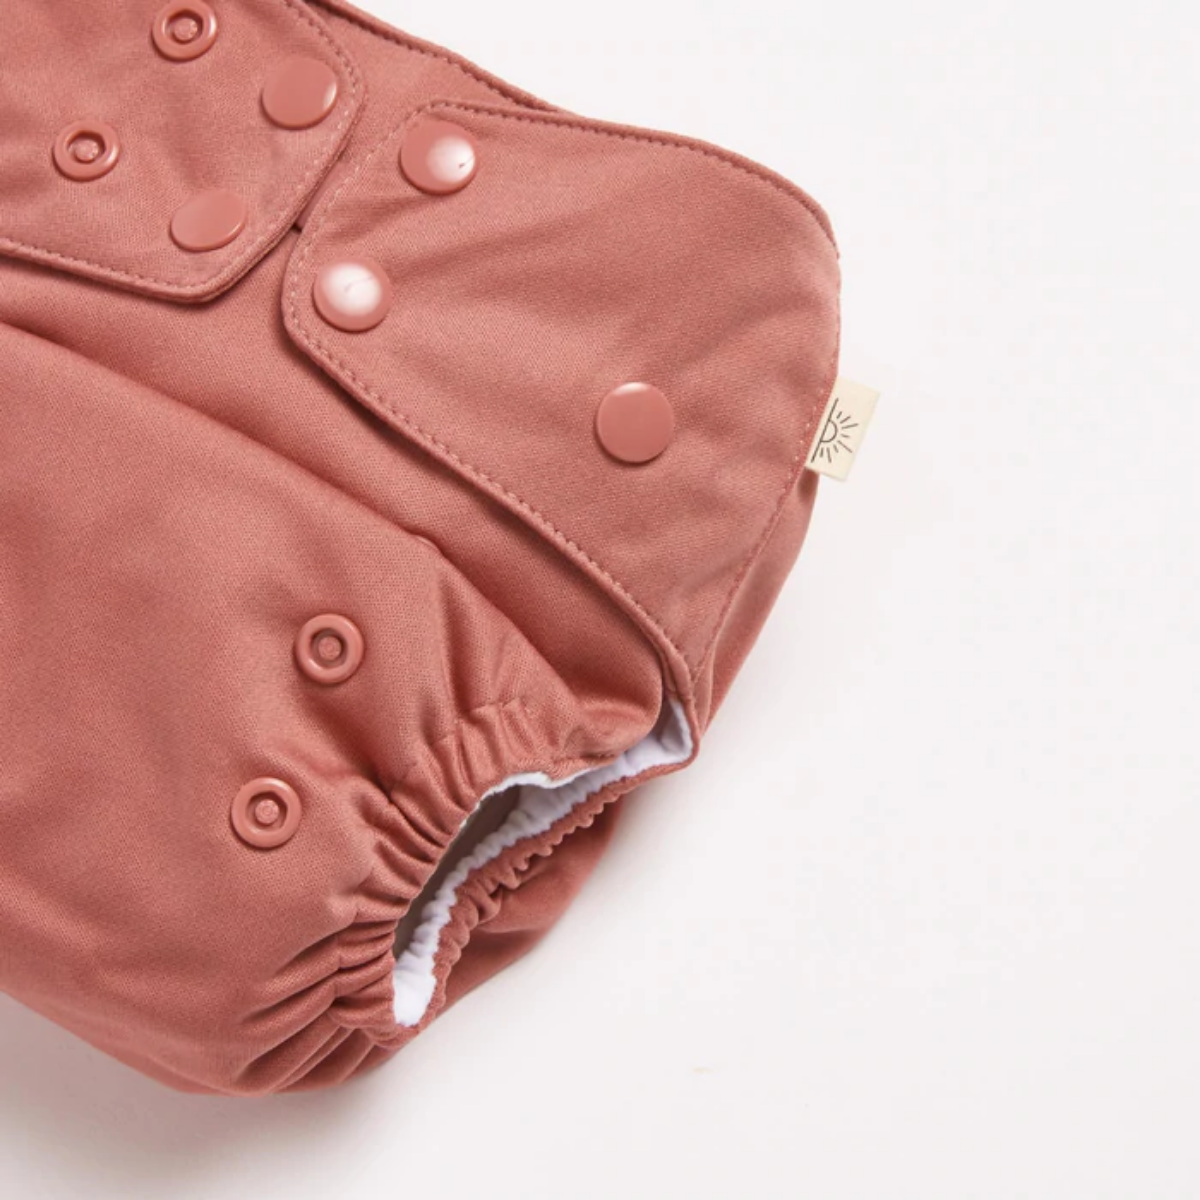 A close up of Terracotta 2.0 Modern Cloth Nappy by EcoNaps on a white surface.